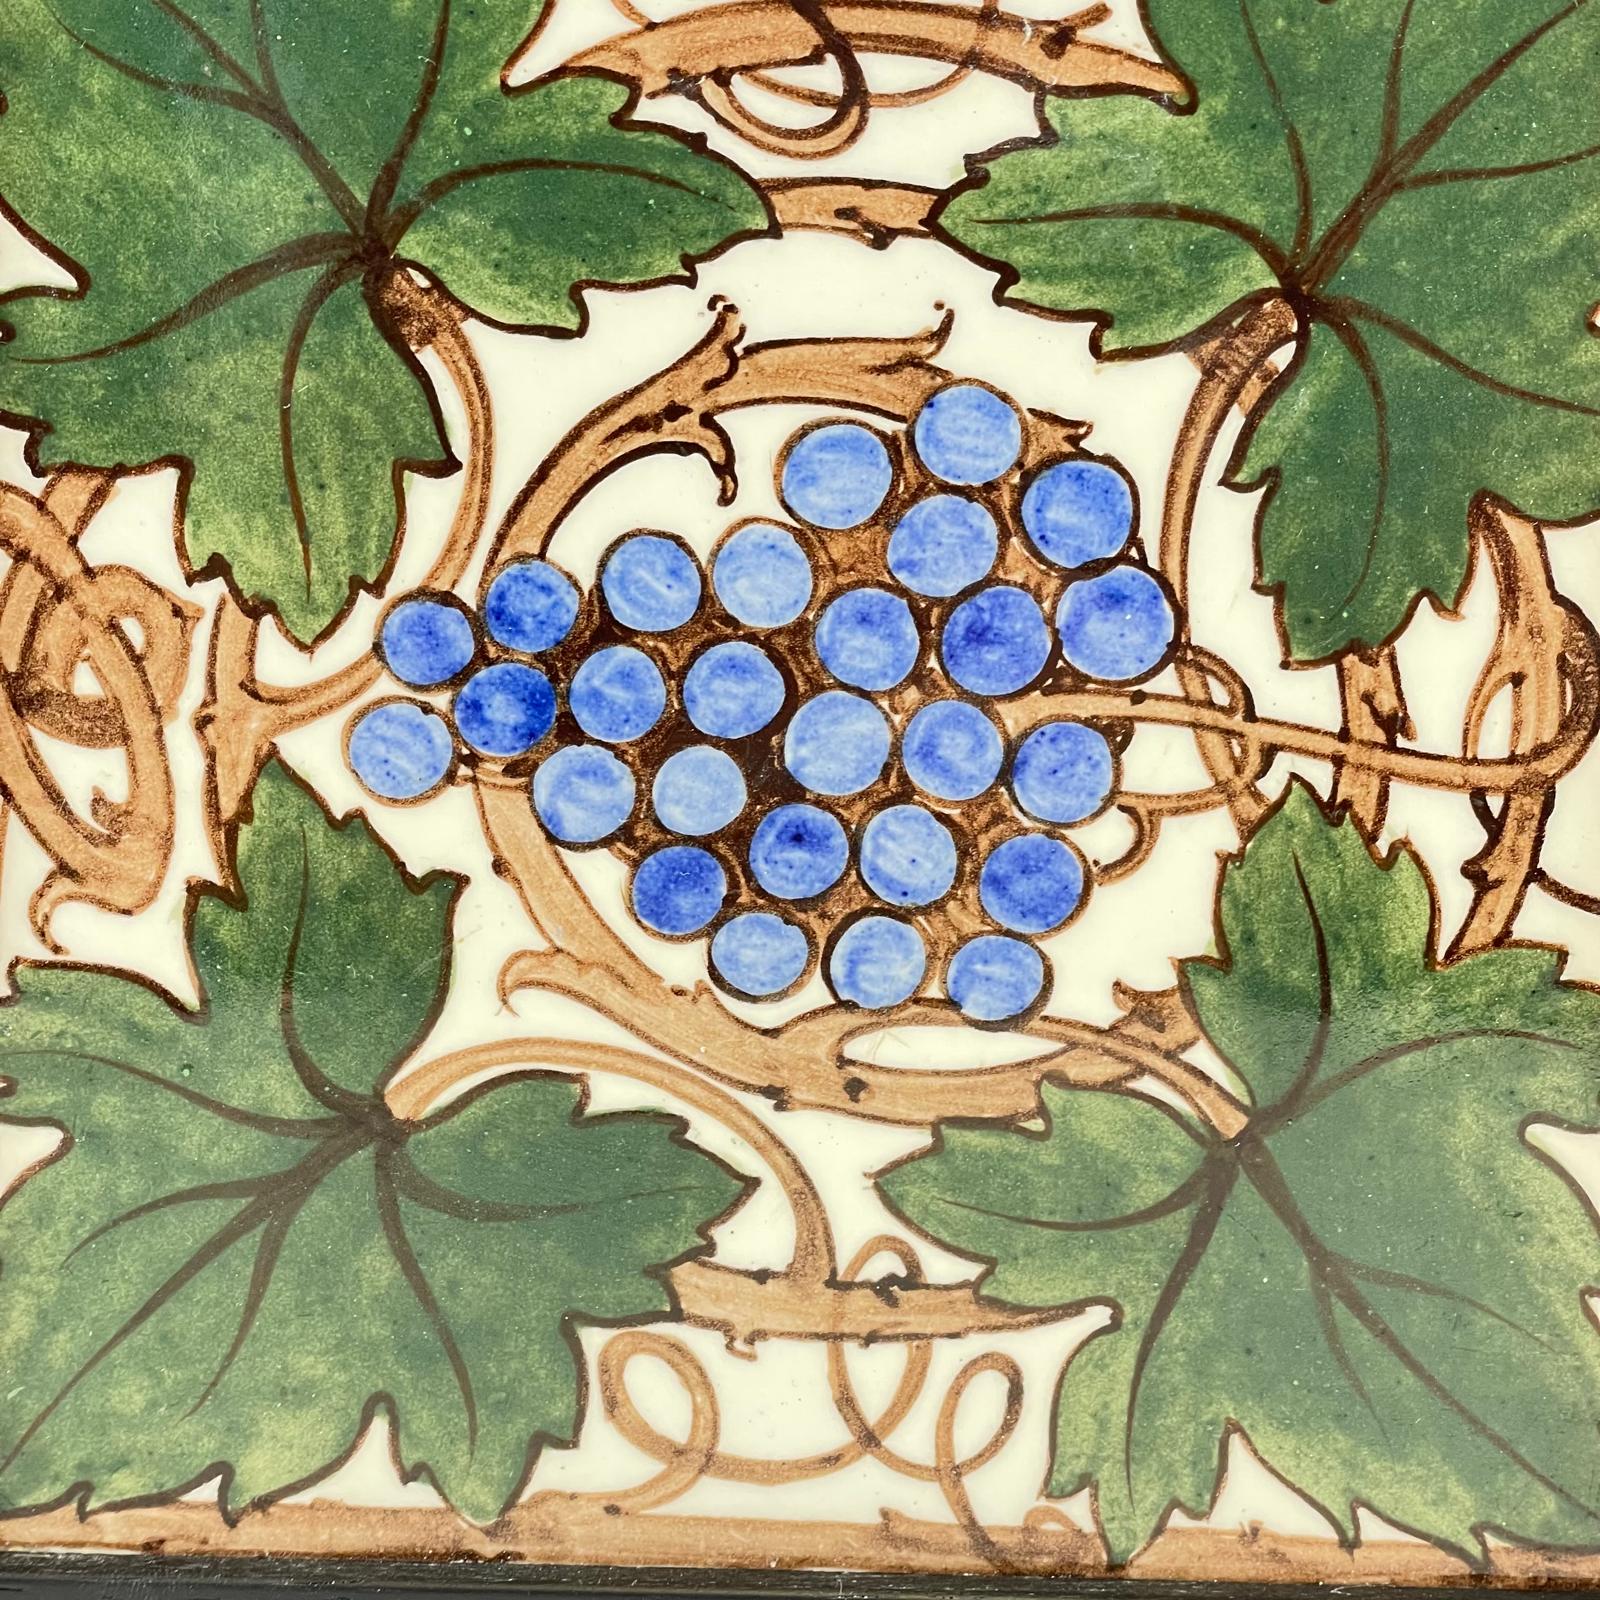 ***AWAY*** Sherwins Lock Back Tile, England. Painted vine leaves and grapes - Image 3 of 4